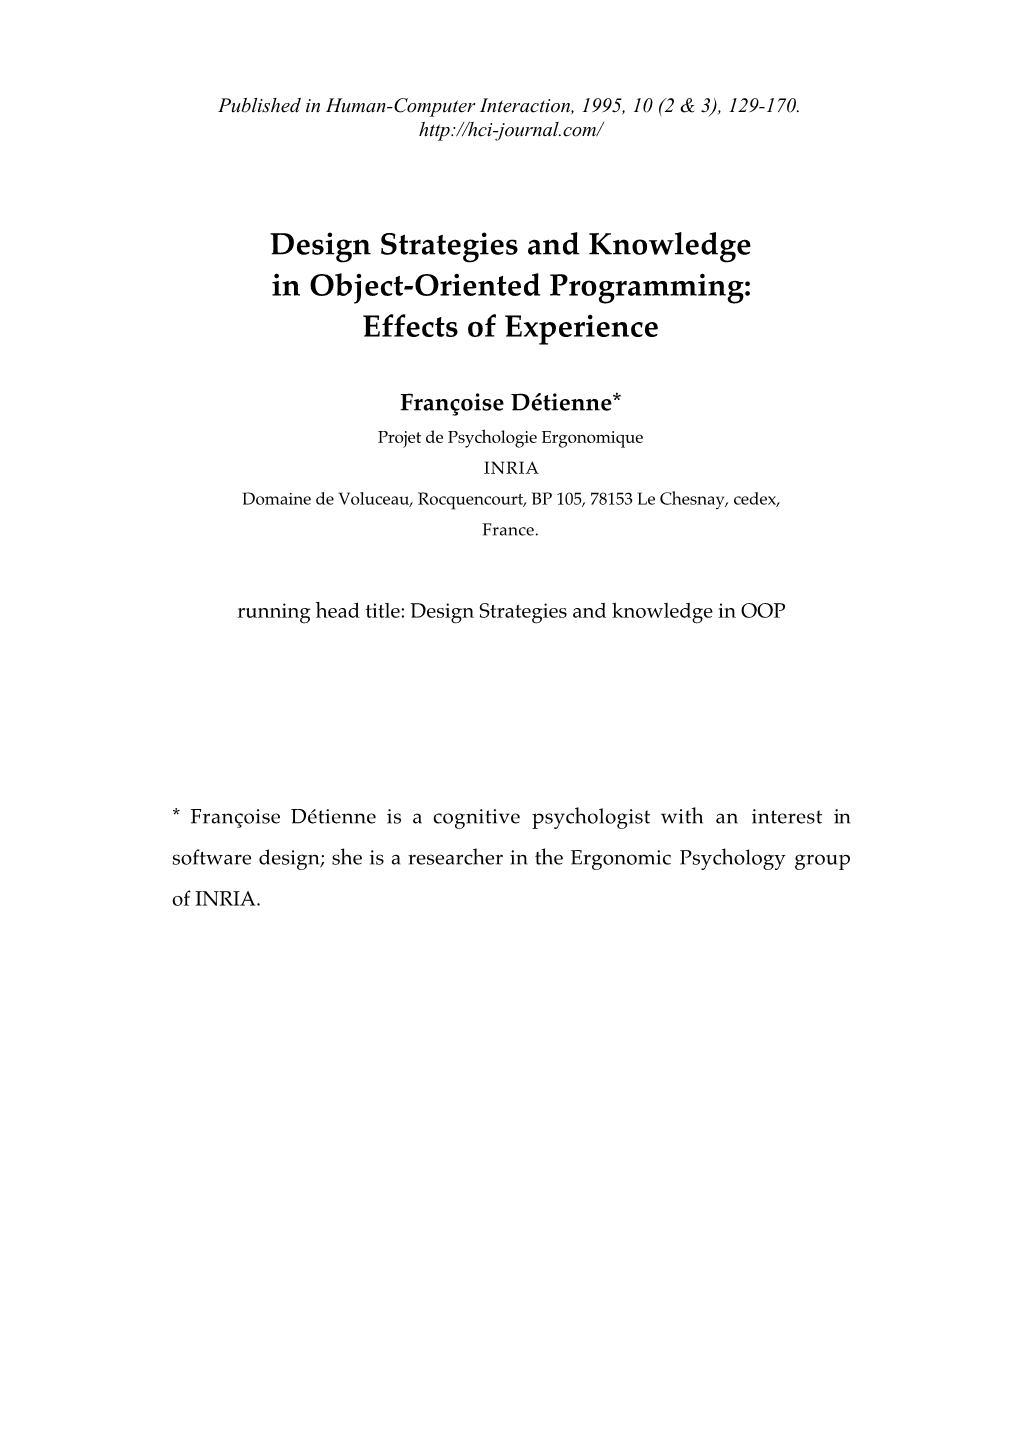 Design Strategies and Knowledge in Object-Oriented Programming: Effects of Experience